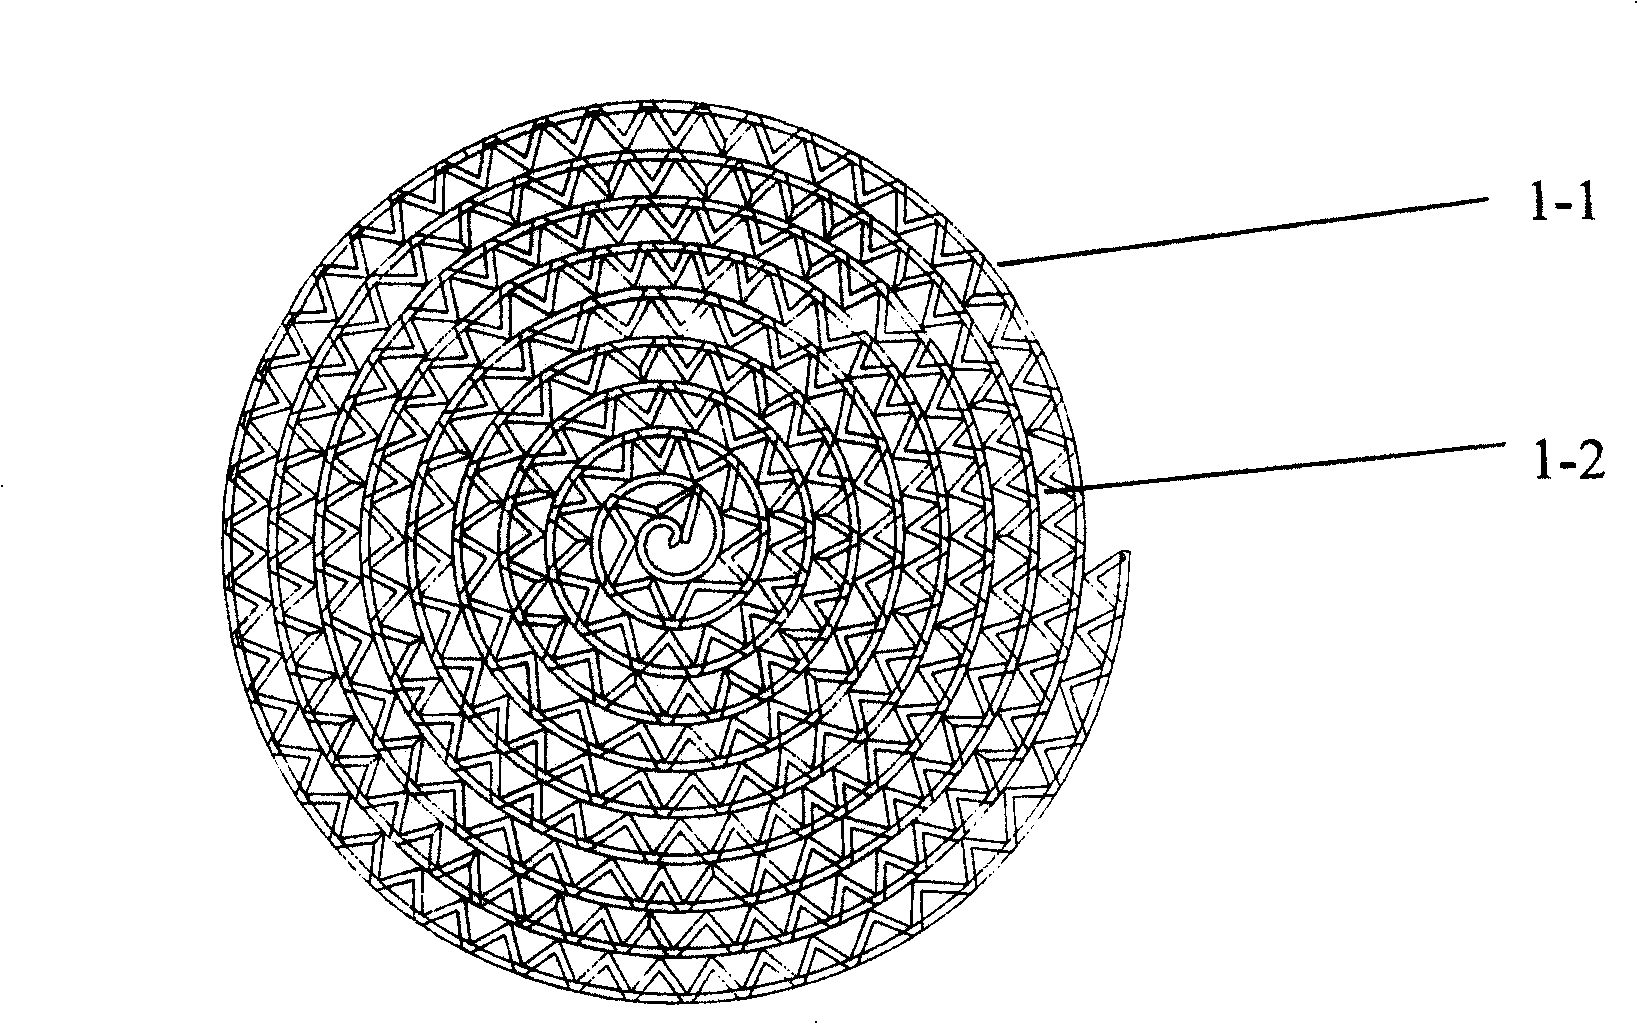 Regular packing of helical cylindrical net